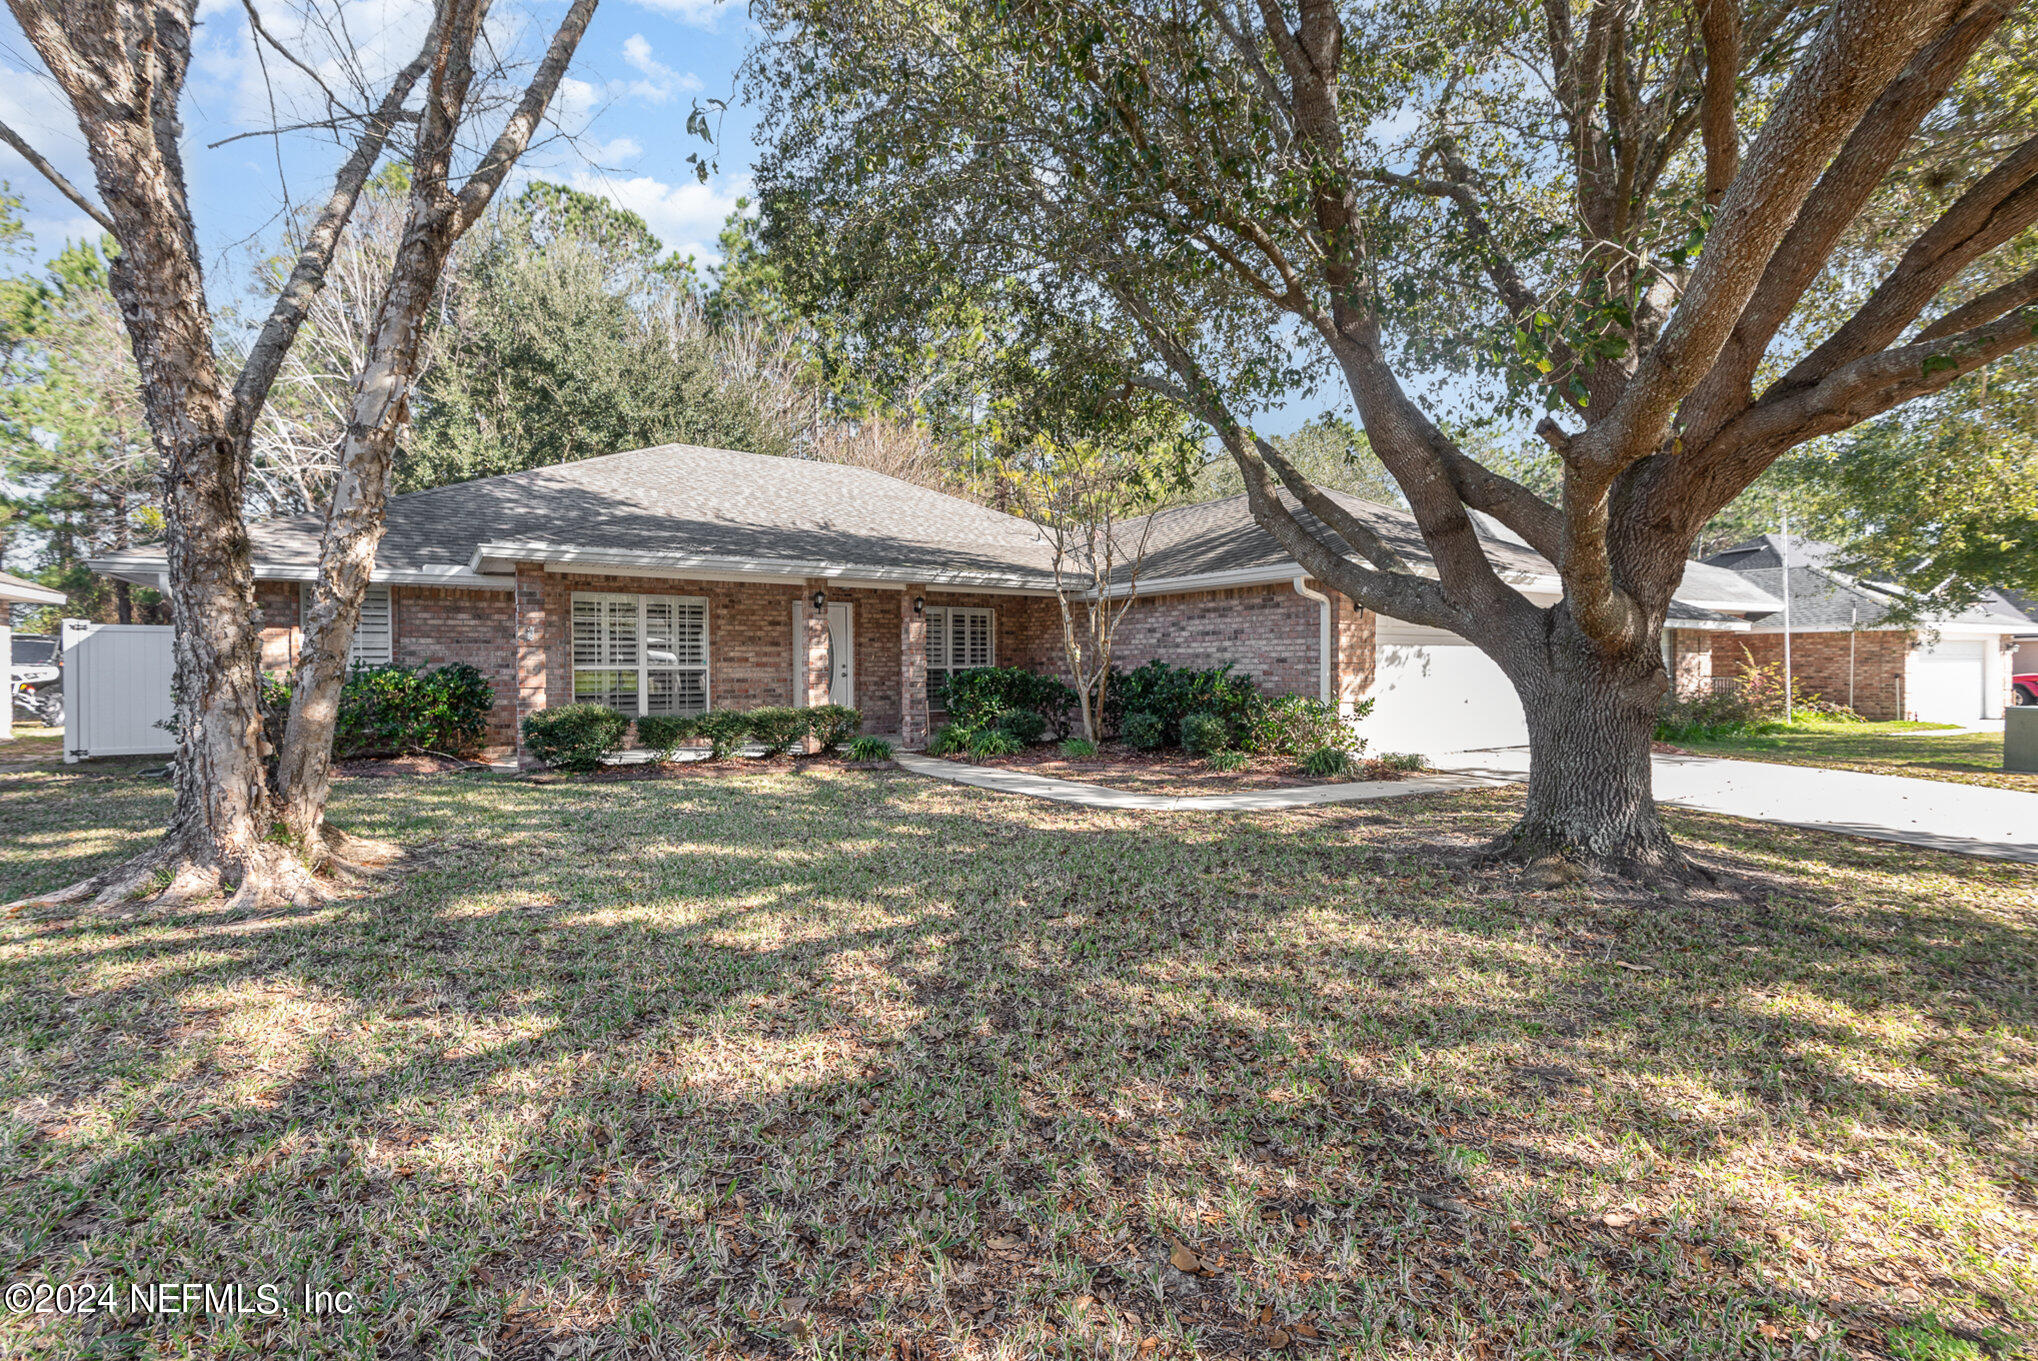 Green Cove Springs, FL home for sale located at 3057 Silverado Circle, Green Cove Springs, FL 32043